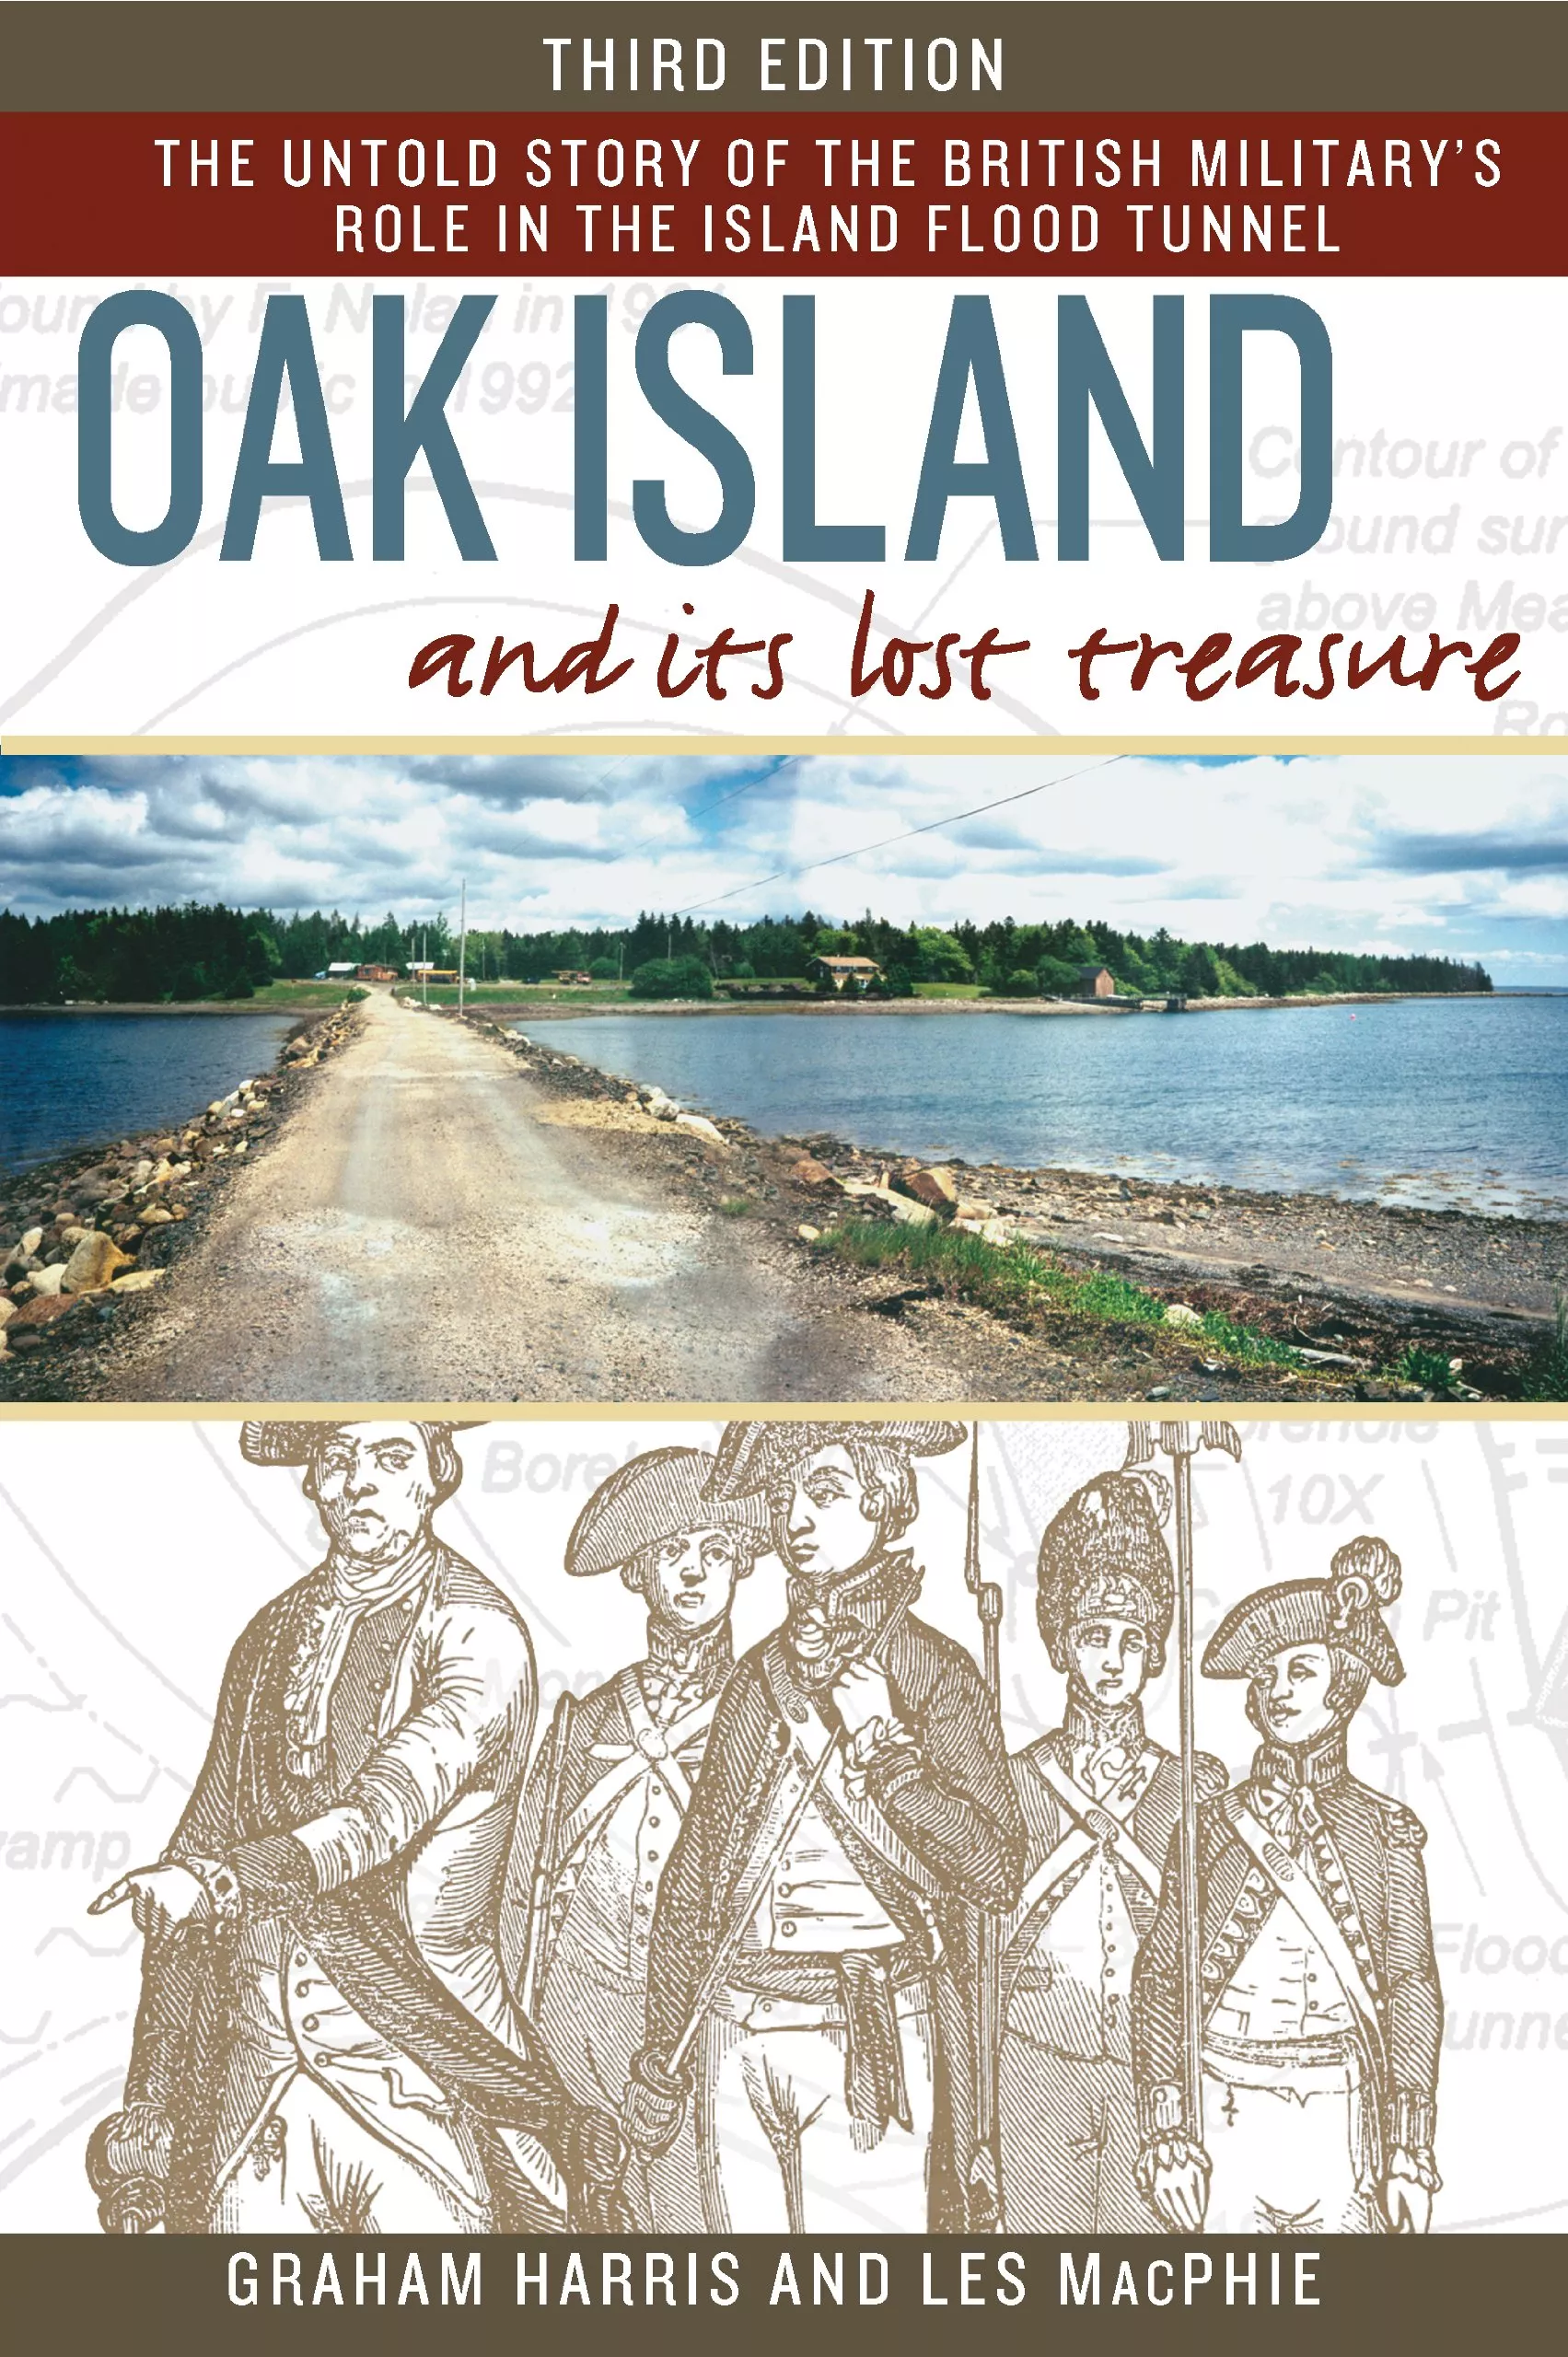 Oak Island and its Lost Treasure: The Untold Story of the British Military's Role in the Island Flood Tunnel